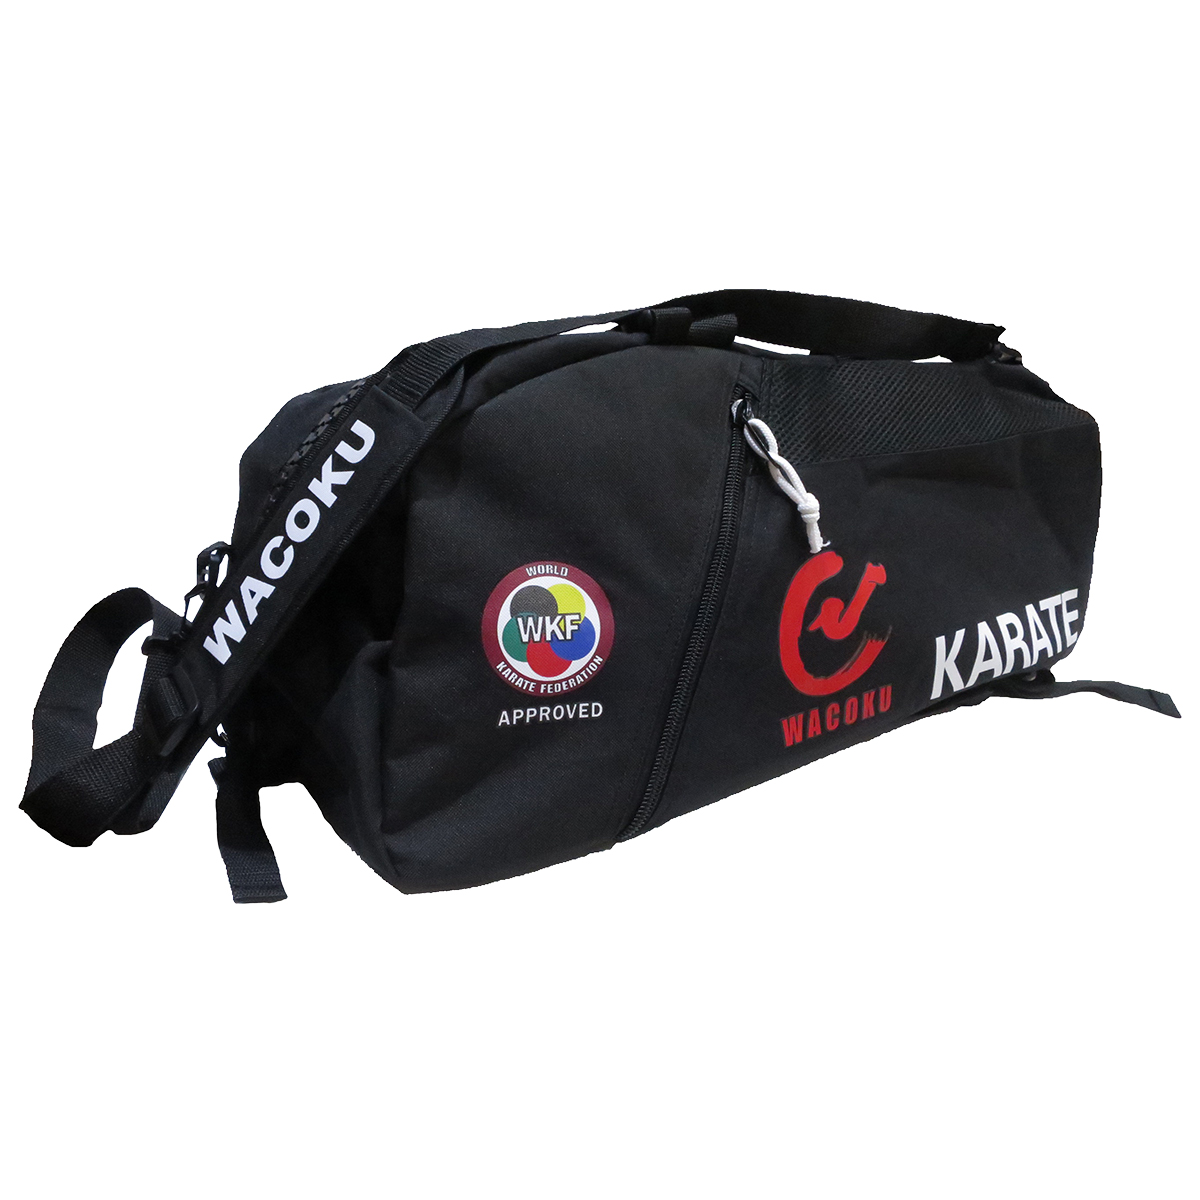 WKF Approved Karate Duffel & Back Pack Bag - Click Image to Close